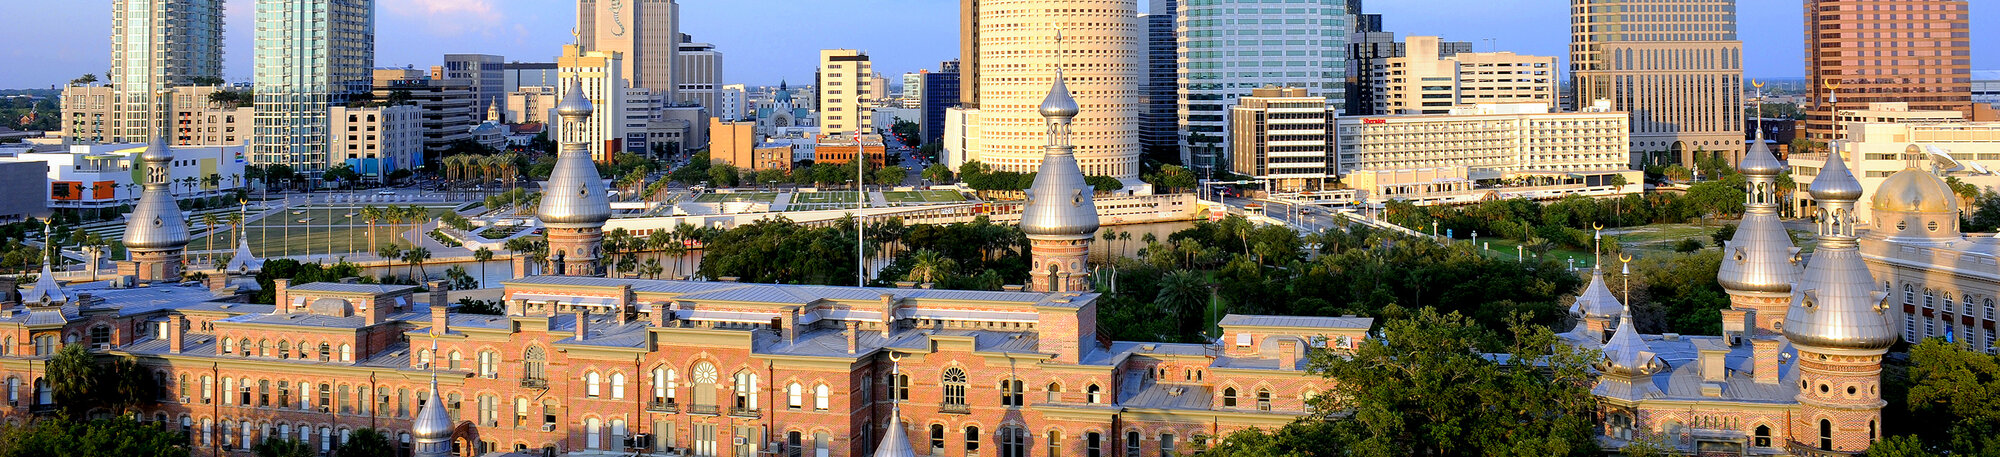 The University of Tampa's background image'